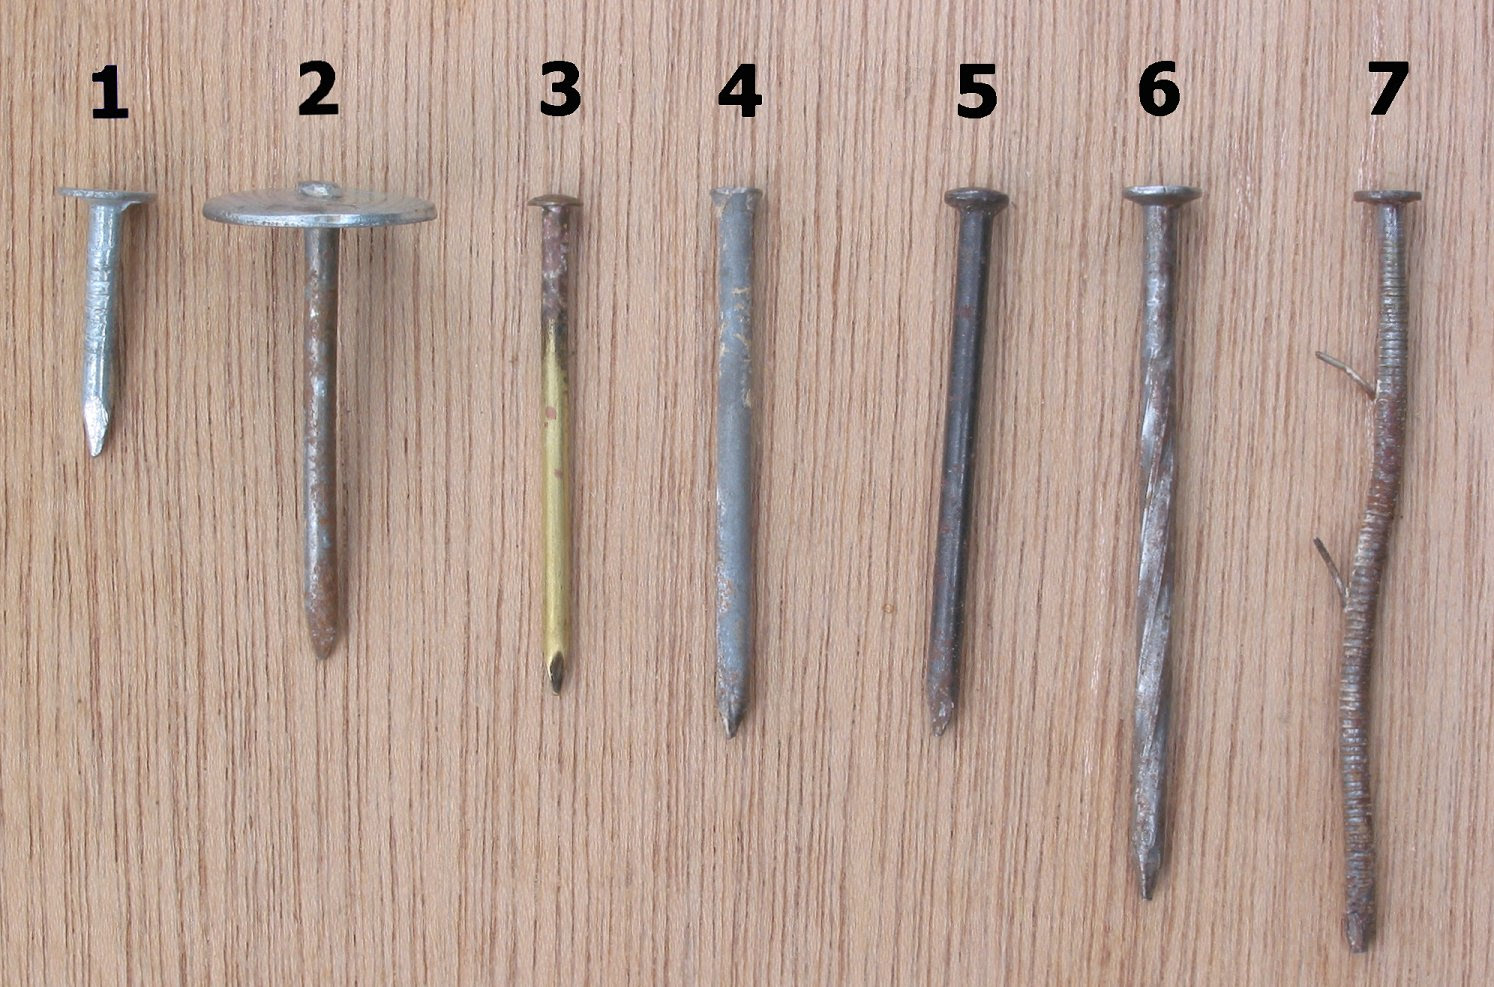 File:Spijkers (Nails).jpg - Wikipedia, the free encyclopedia